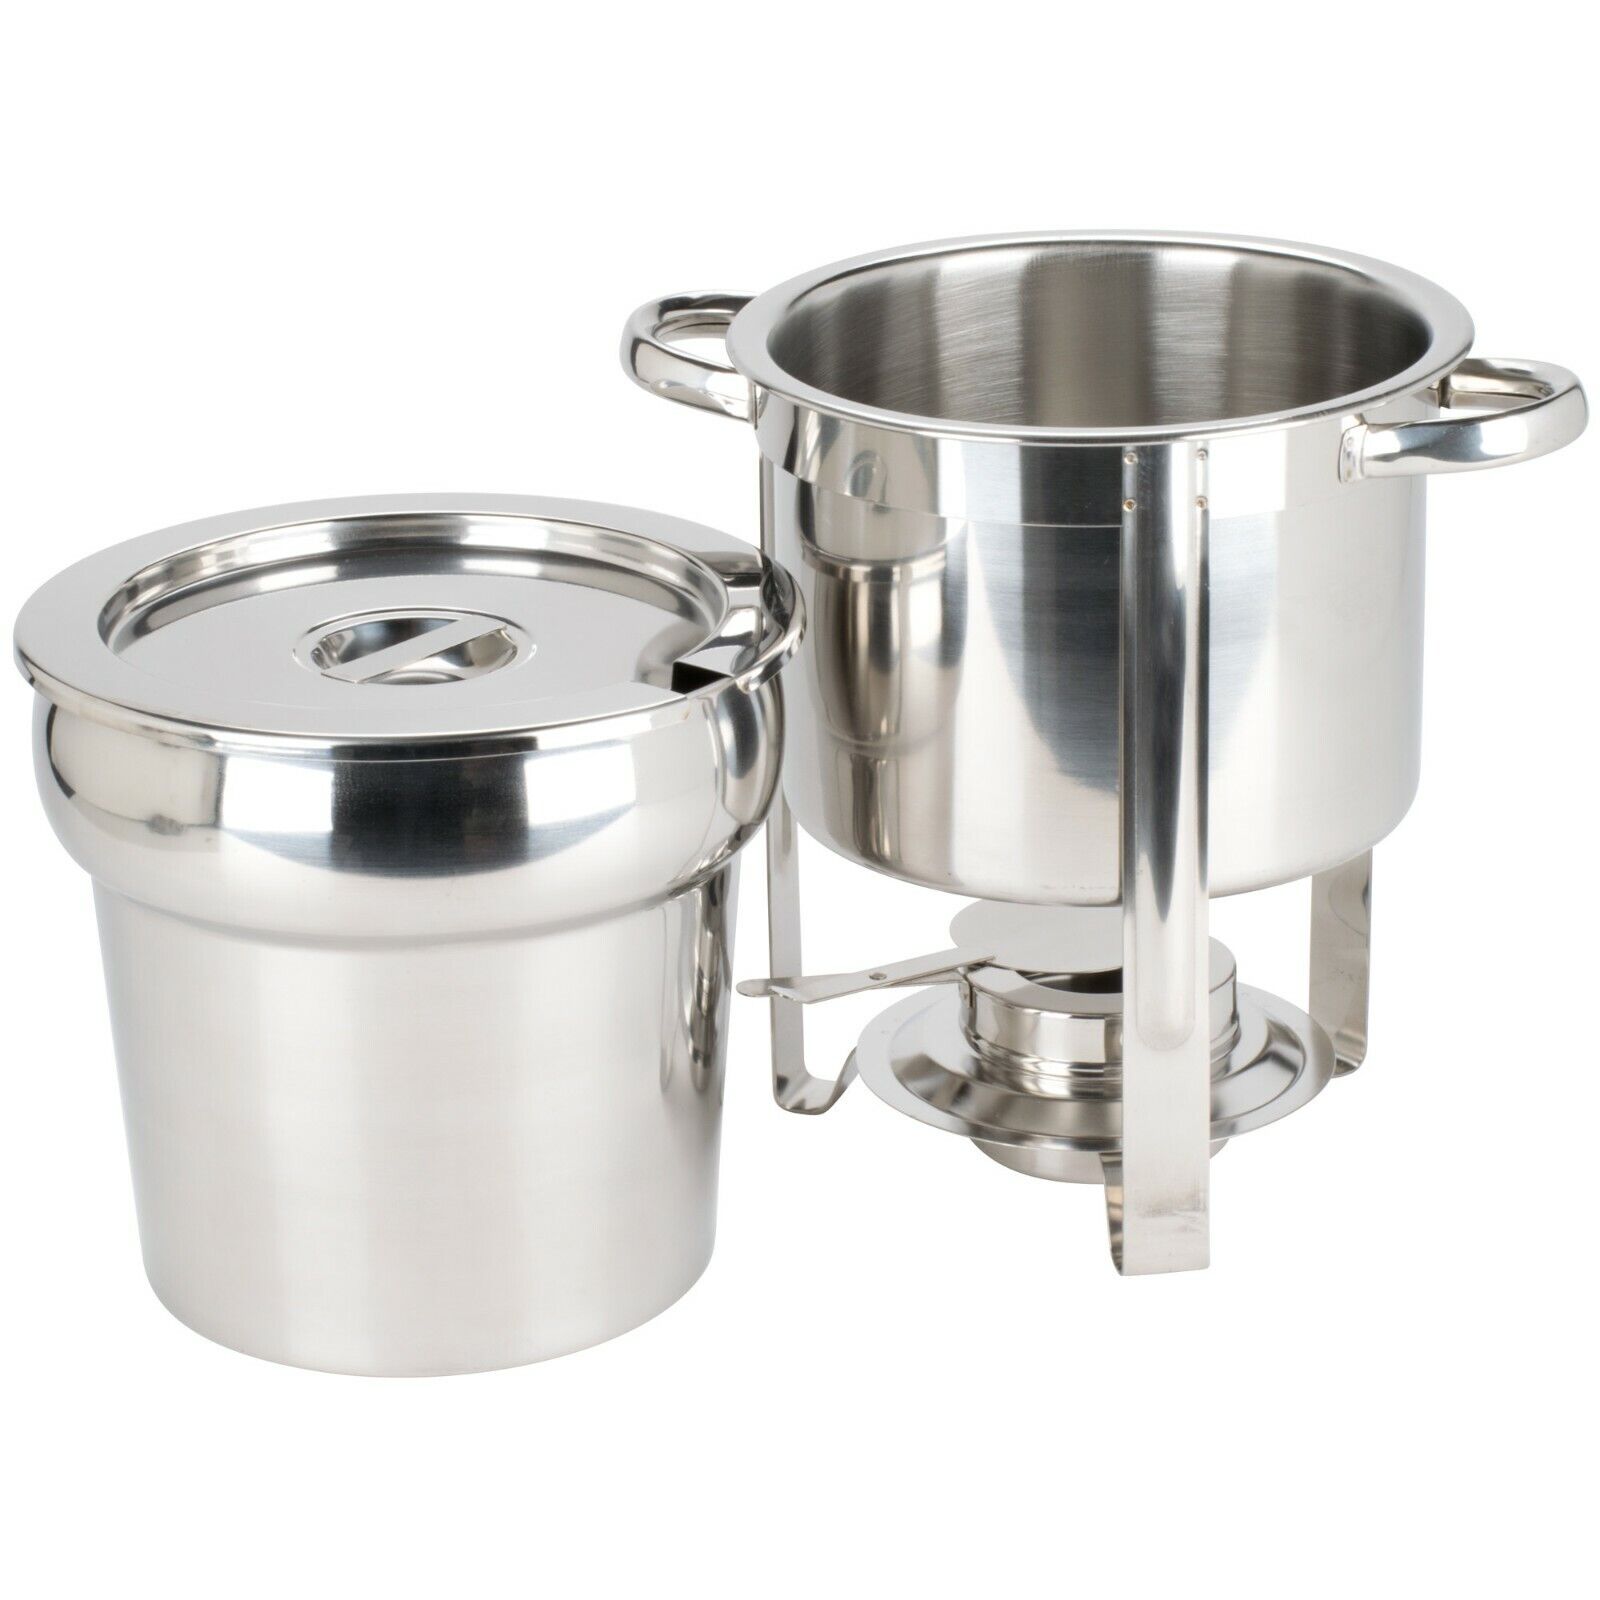 2 PACK Stainless Steel Choice Deluxe 7 Qt. Round Soup Chafer / Marmite Chafer Choice Does Not Apply - фотография #3